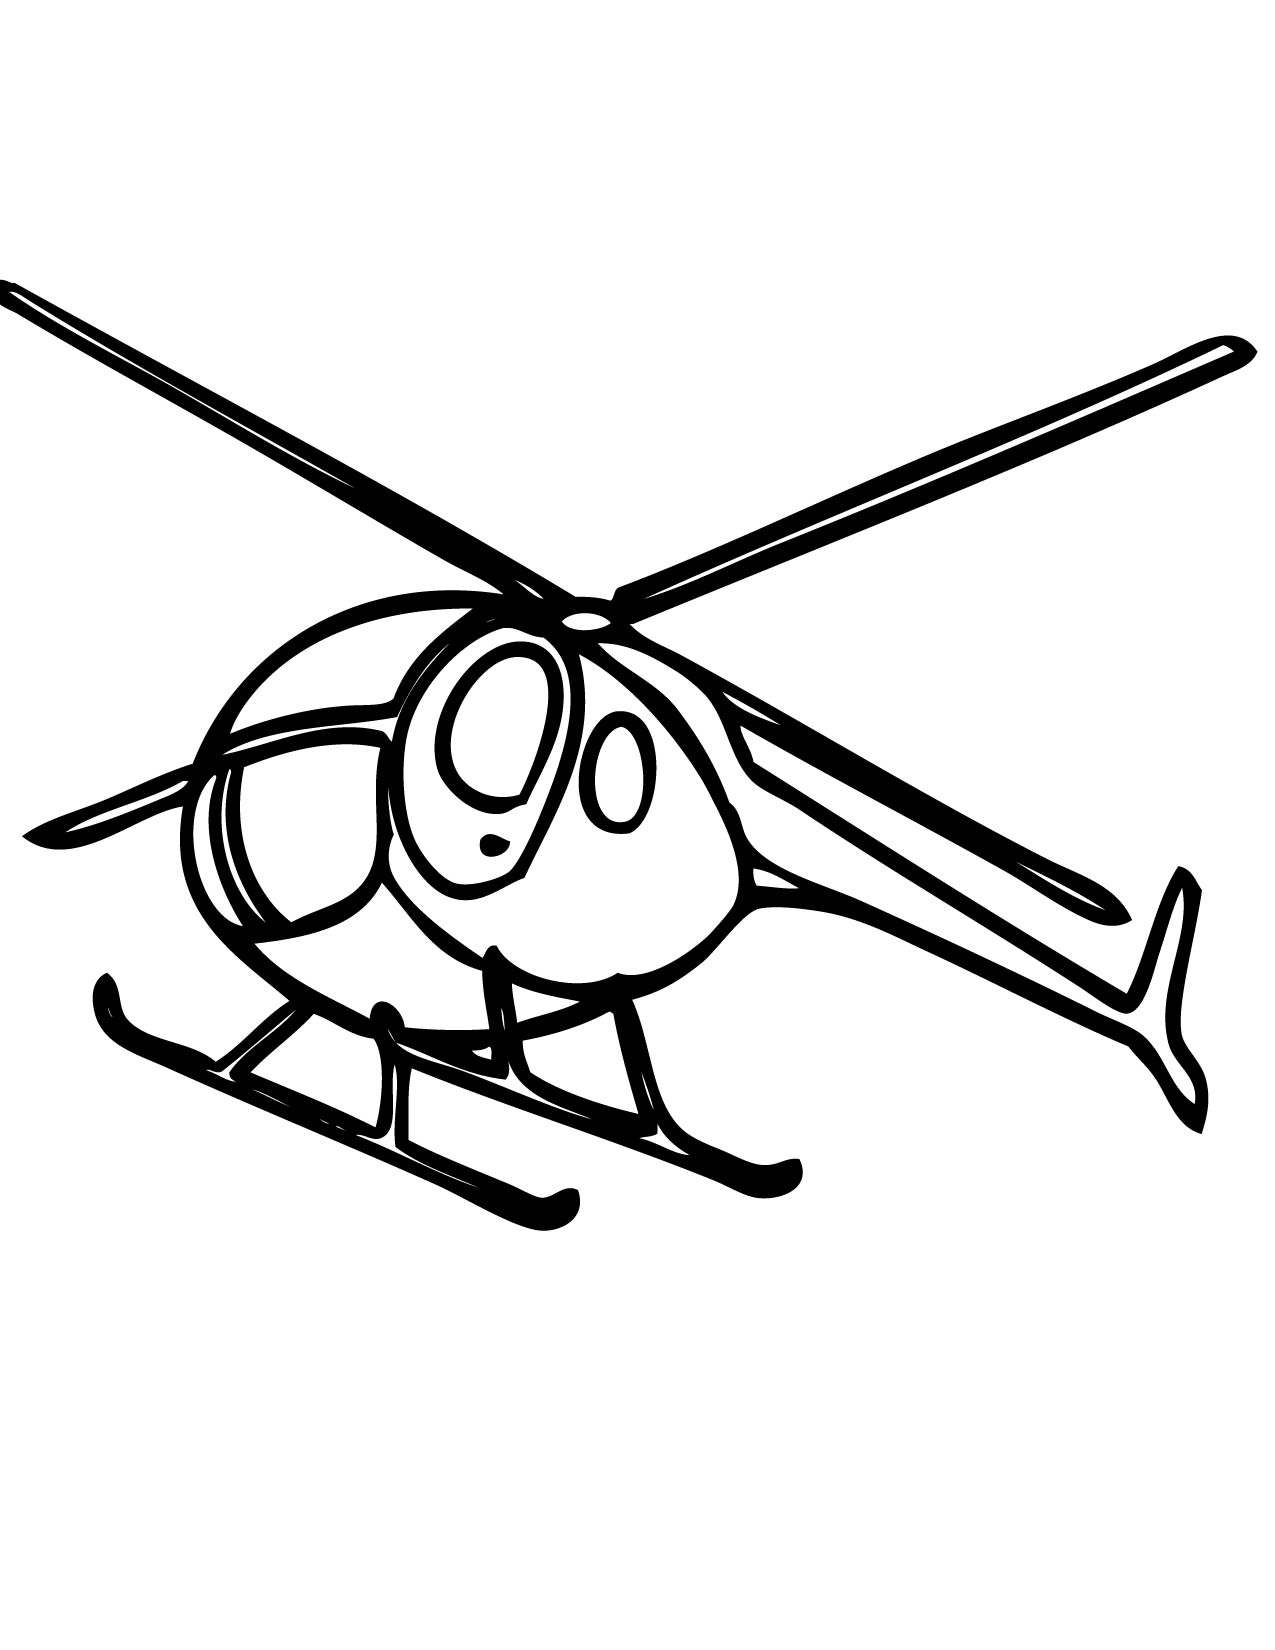 Helicopter Images For Coloring 6